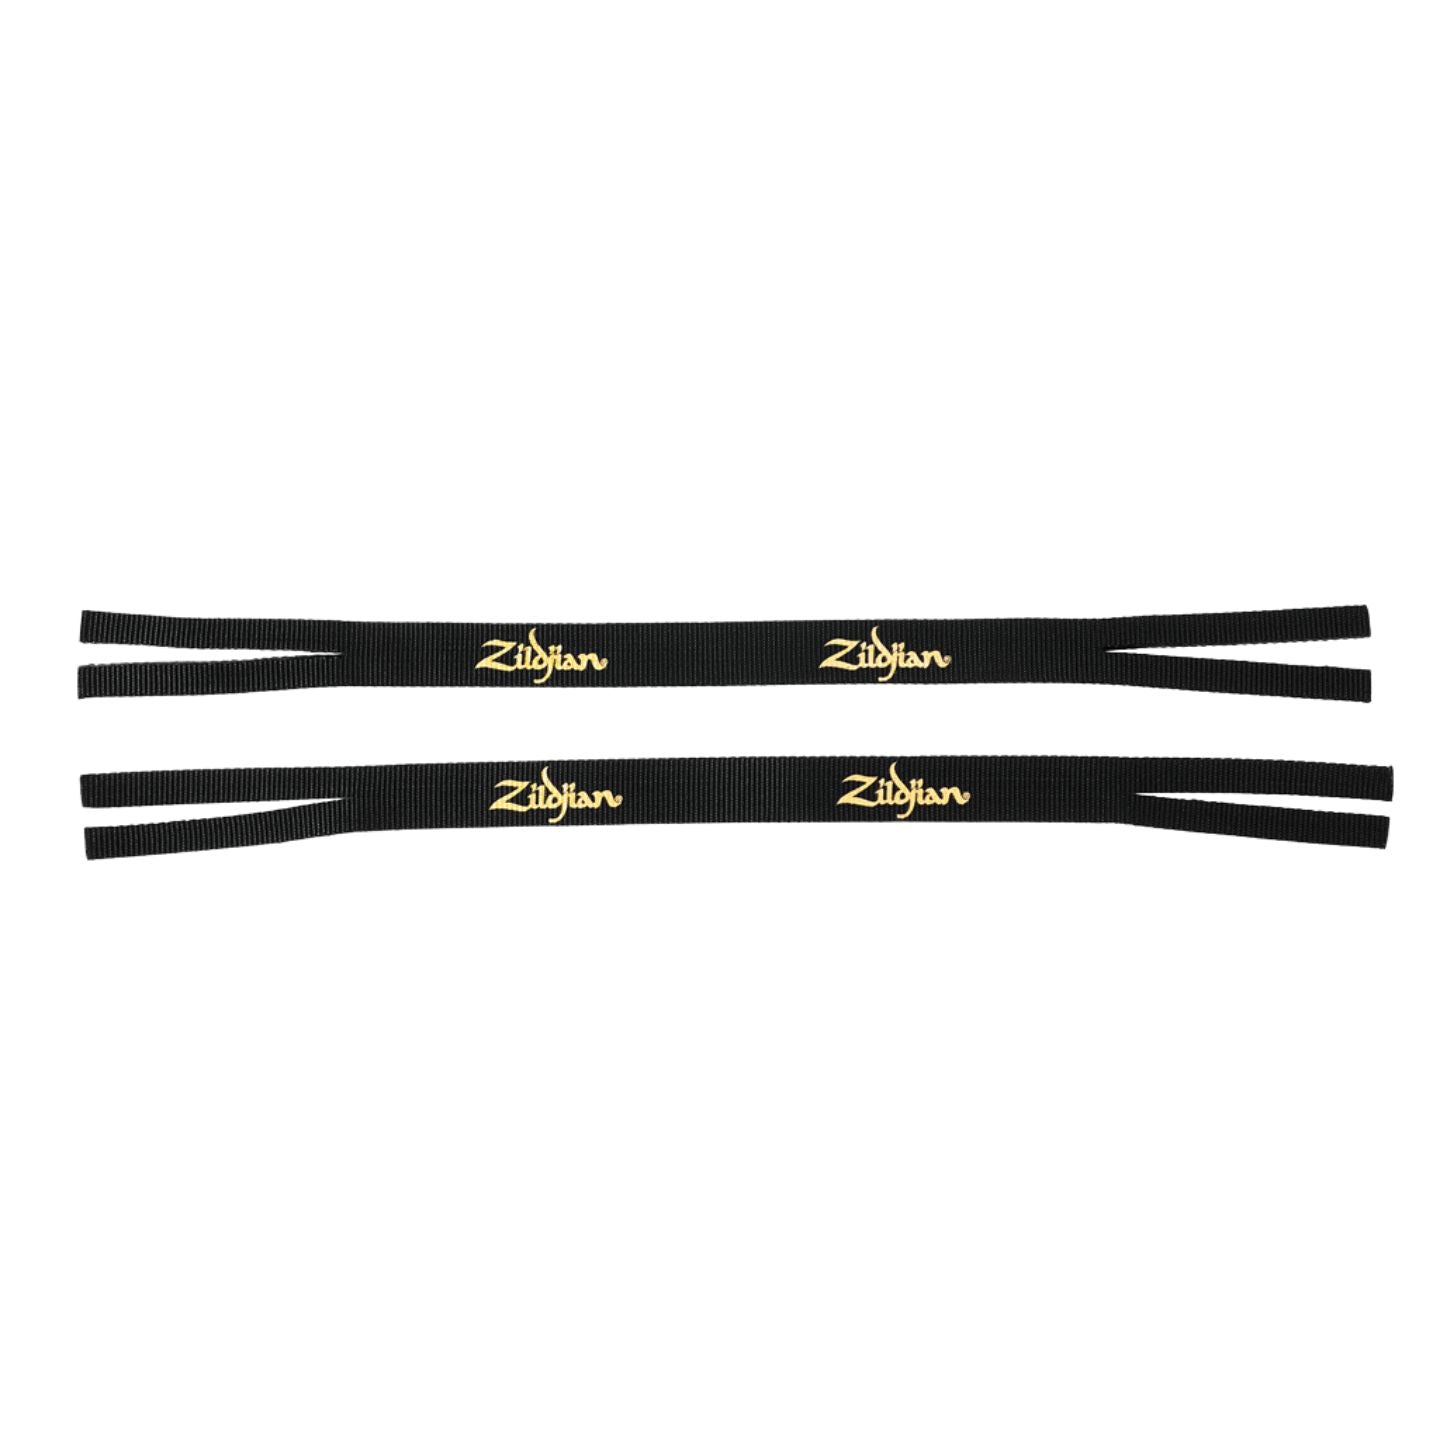 Zildjian Leather / Nylon Concert & Marching Percussion Cymbal Drum Straps | P0750, P0754